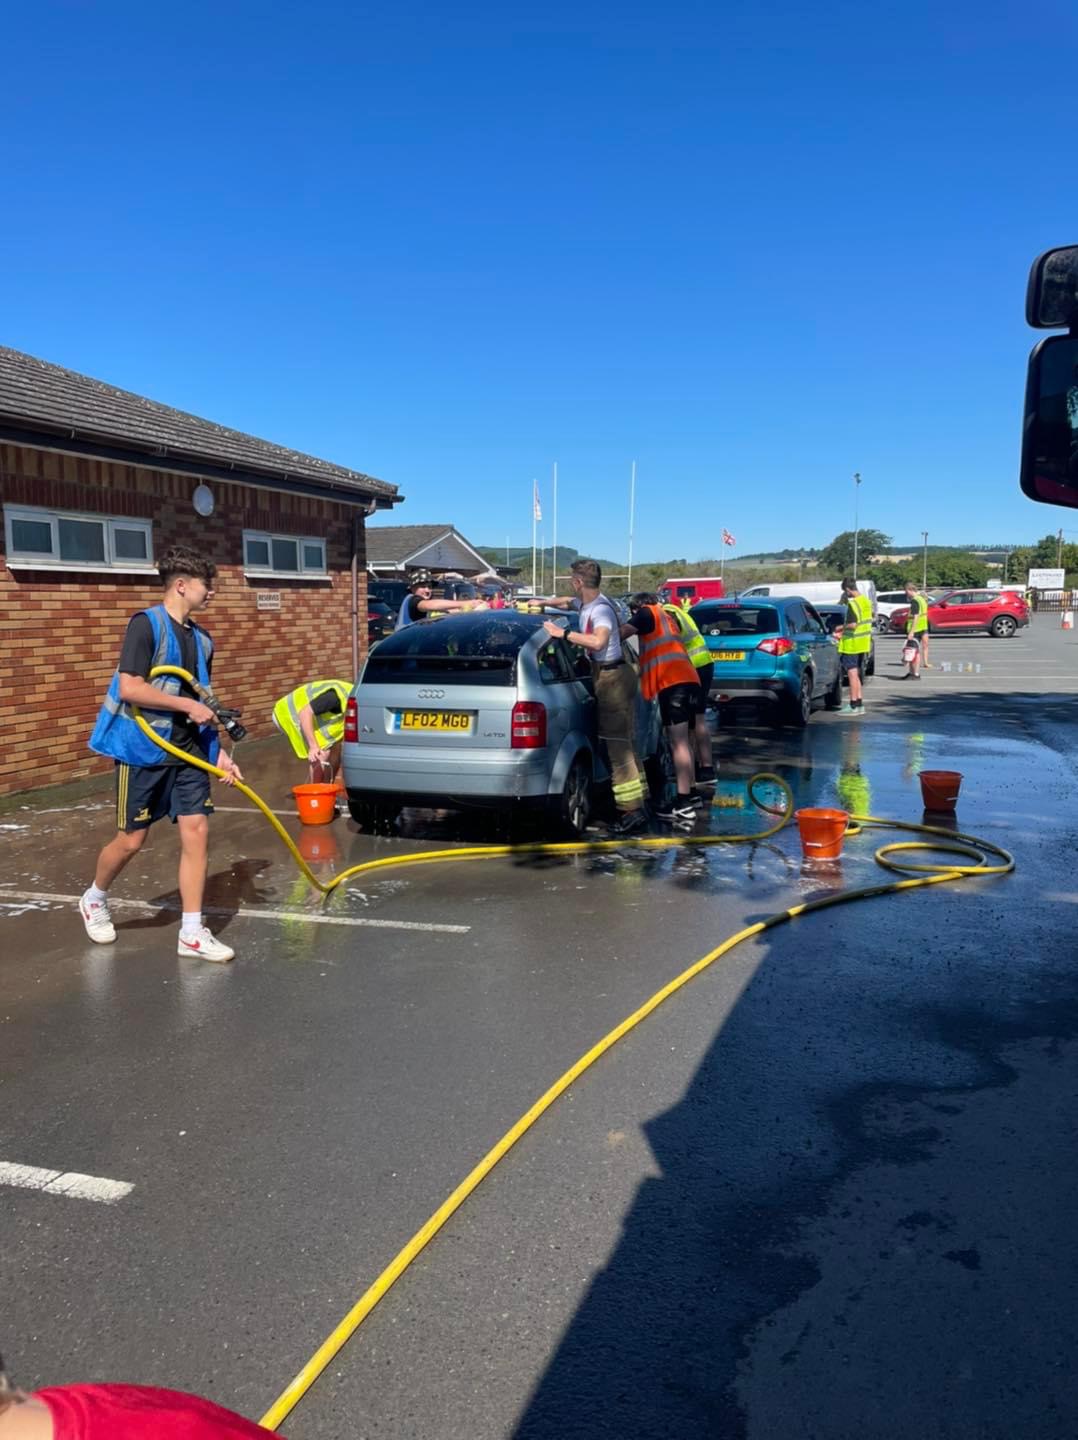 NEWS | Kingsland Fire Station car wash raises £1,555 for two brilliant charities